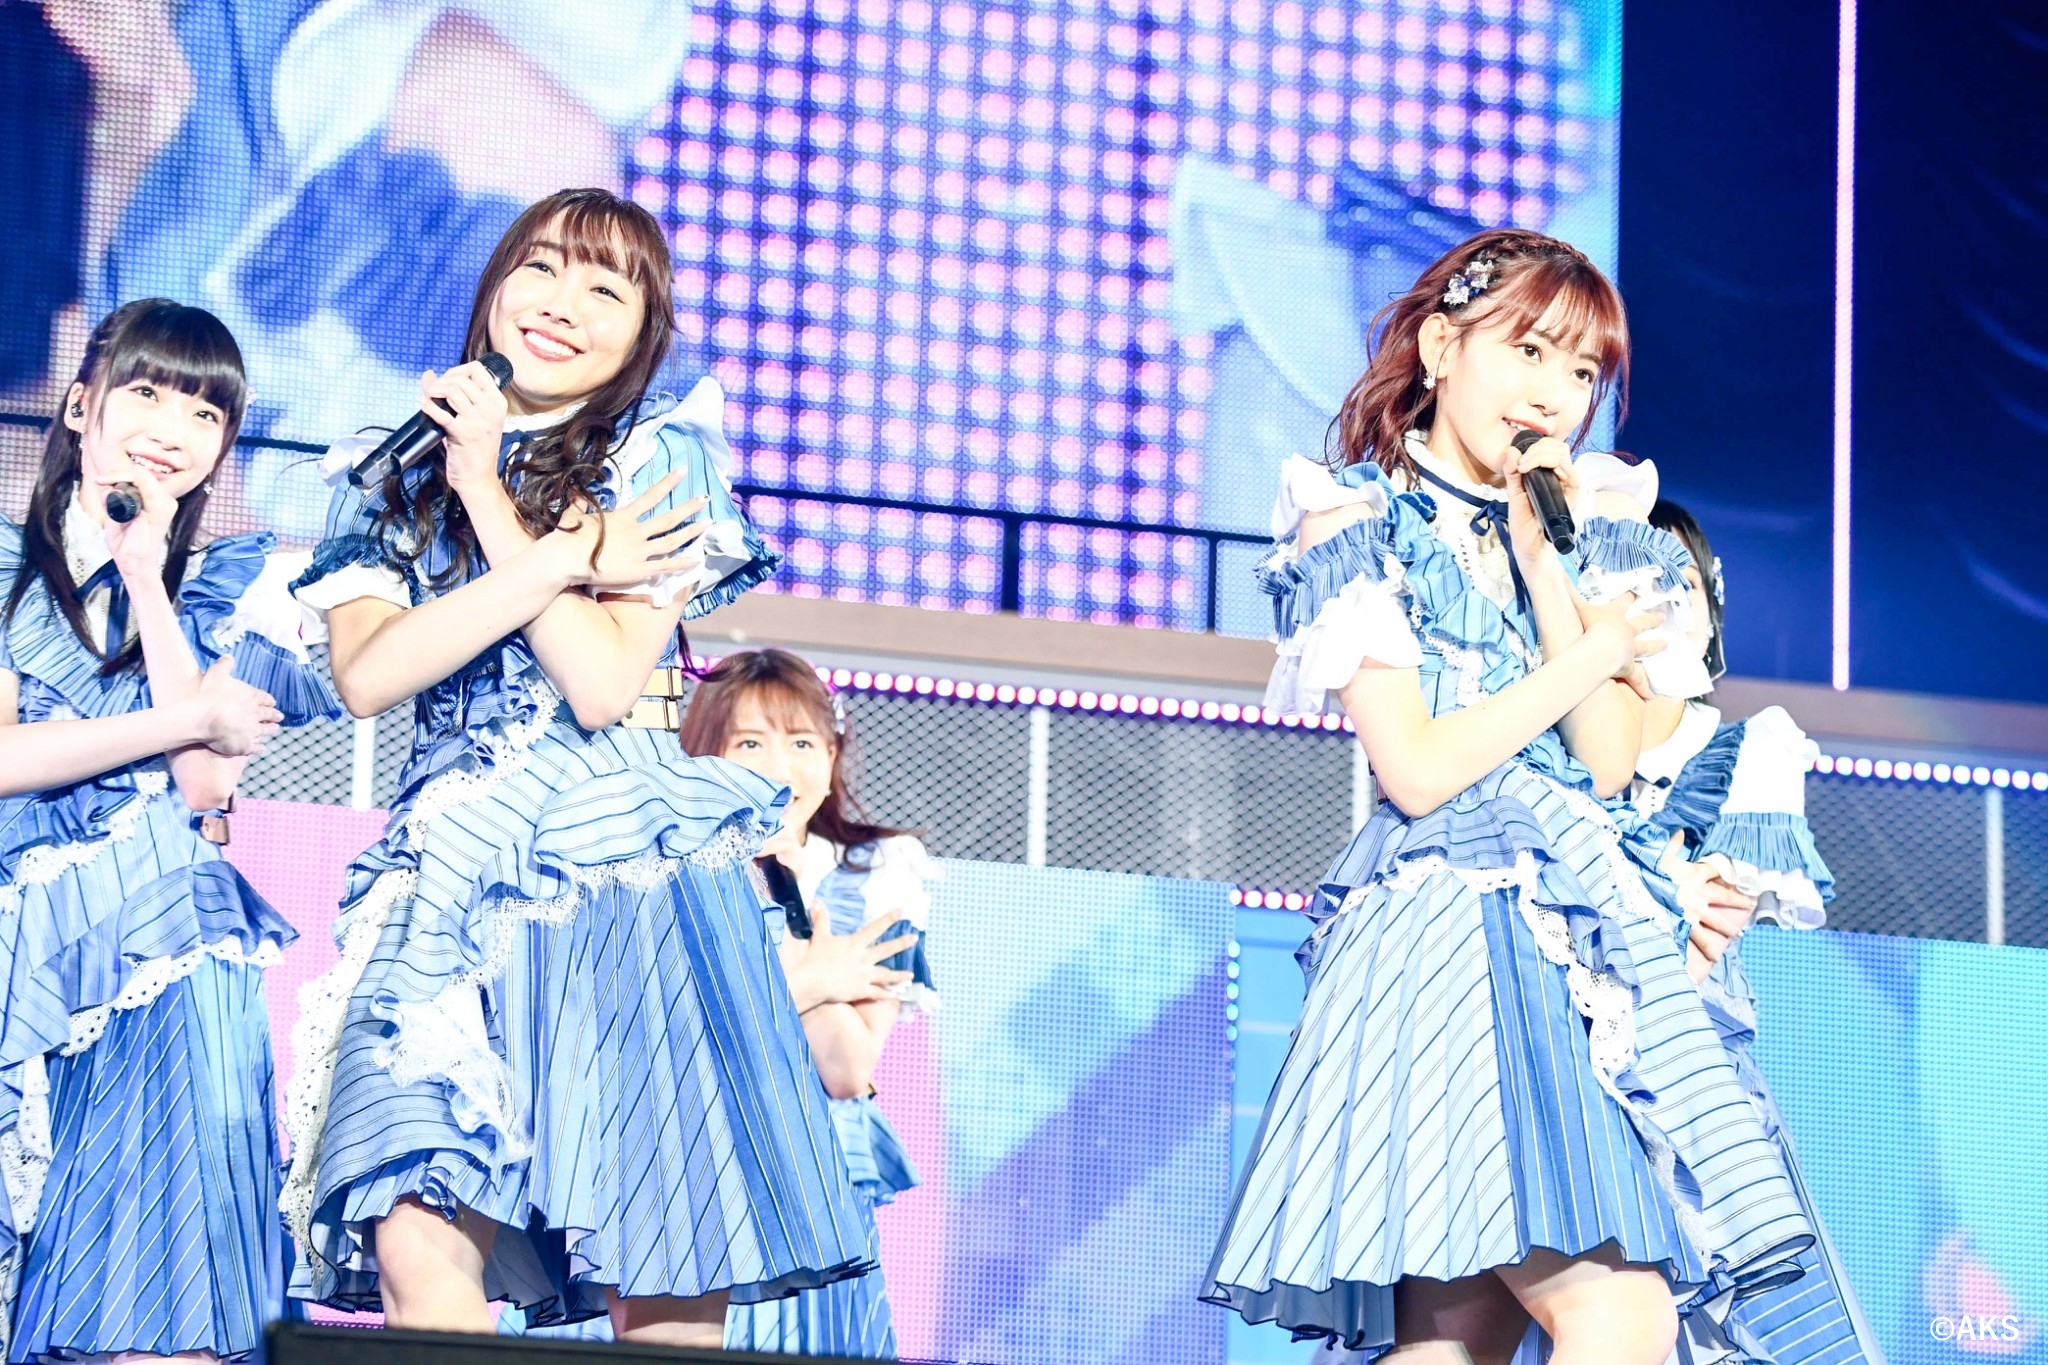 「AKB48 Group Kanshasai〜Rank-in Concert〜」Day 2 Held on August 2 (Thurs)